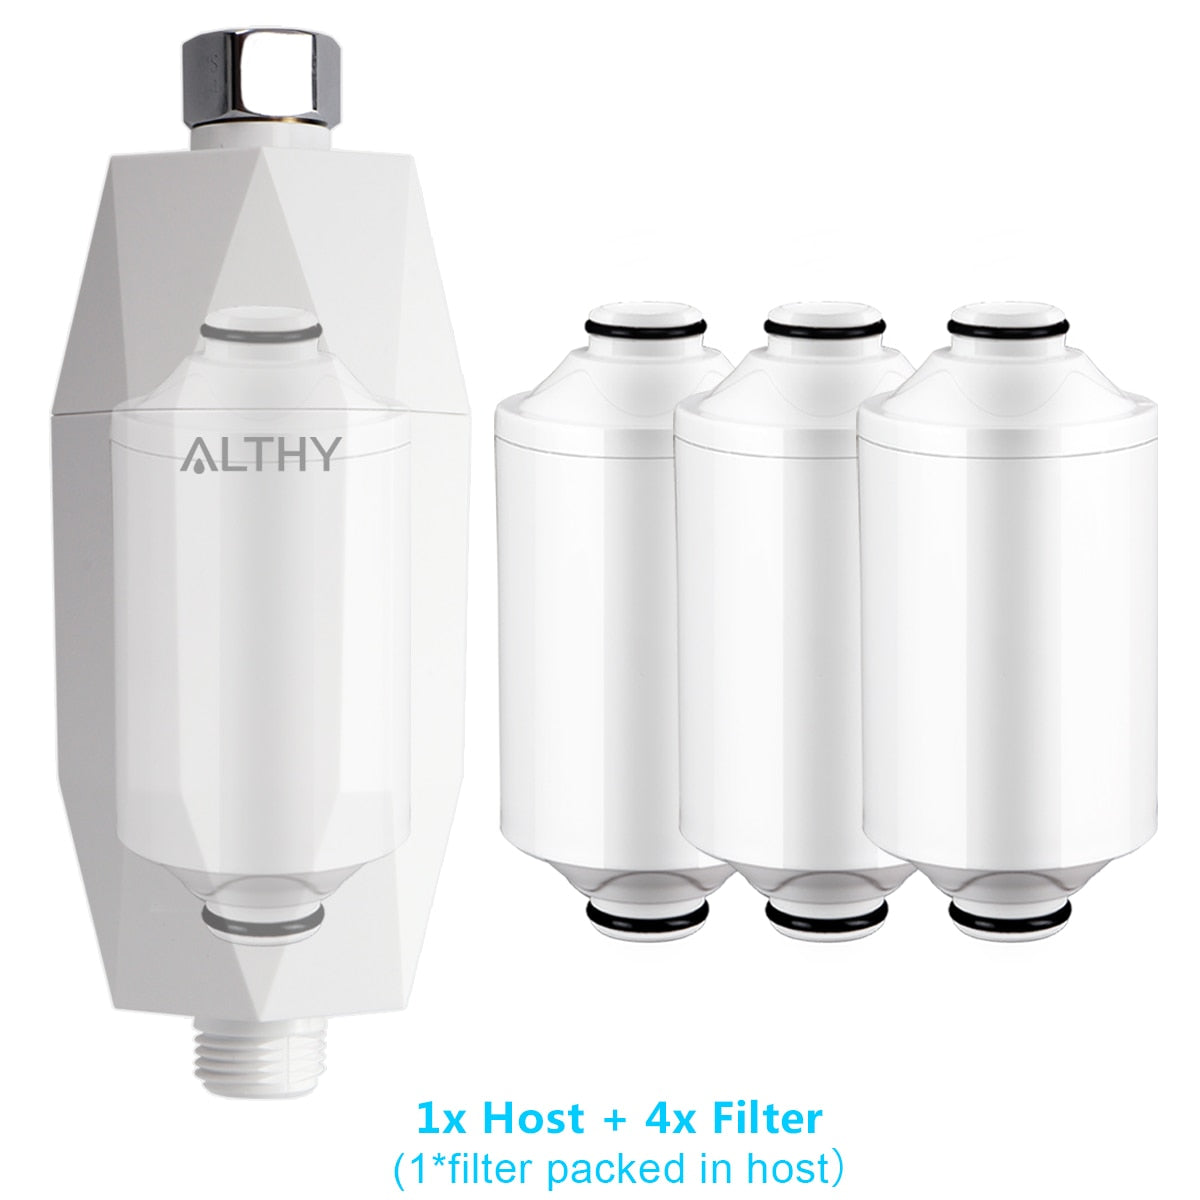 ALTHY Vitamin C Revitalizing Shower Water Filter - Reduces Dry Itchy Skin, Dandruff, Eczema, Dramatically & Improves Skin, Hair 1xHostand4xFilterChina Hardware > Plumbing > Water Dispensing & Filtration 152.47 EZYSELLA SHOP